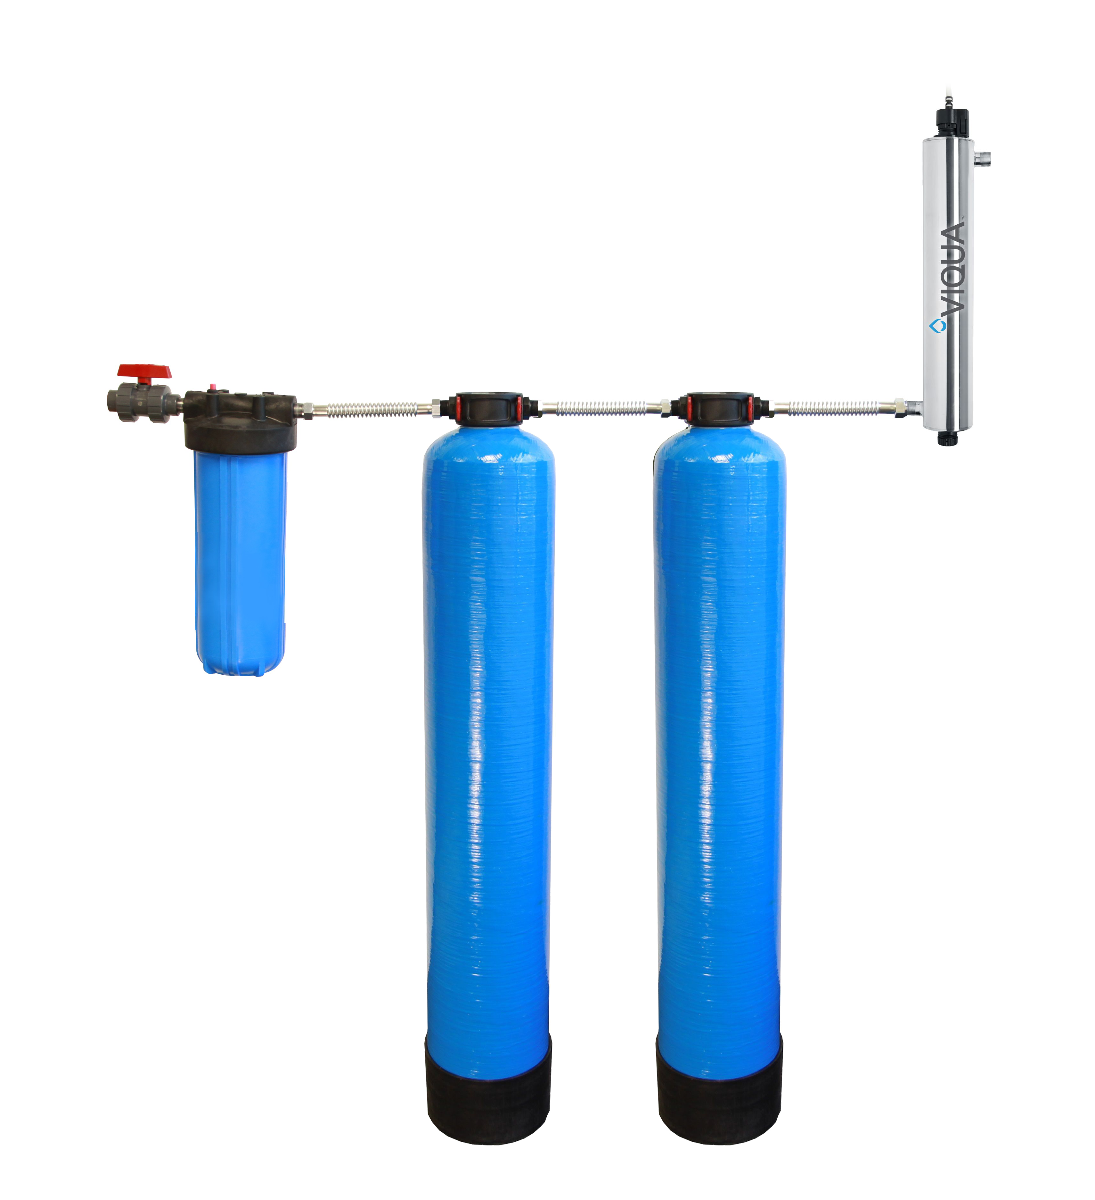 Water Softeners, Filters, & More